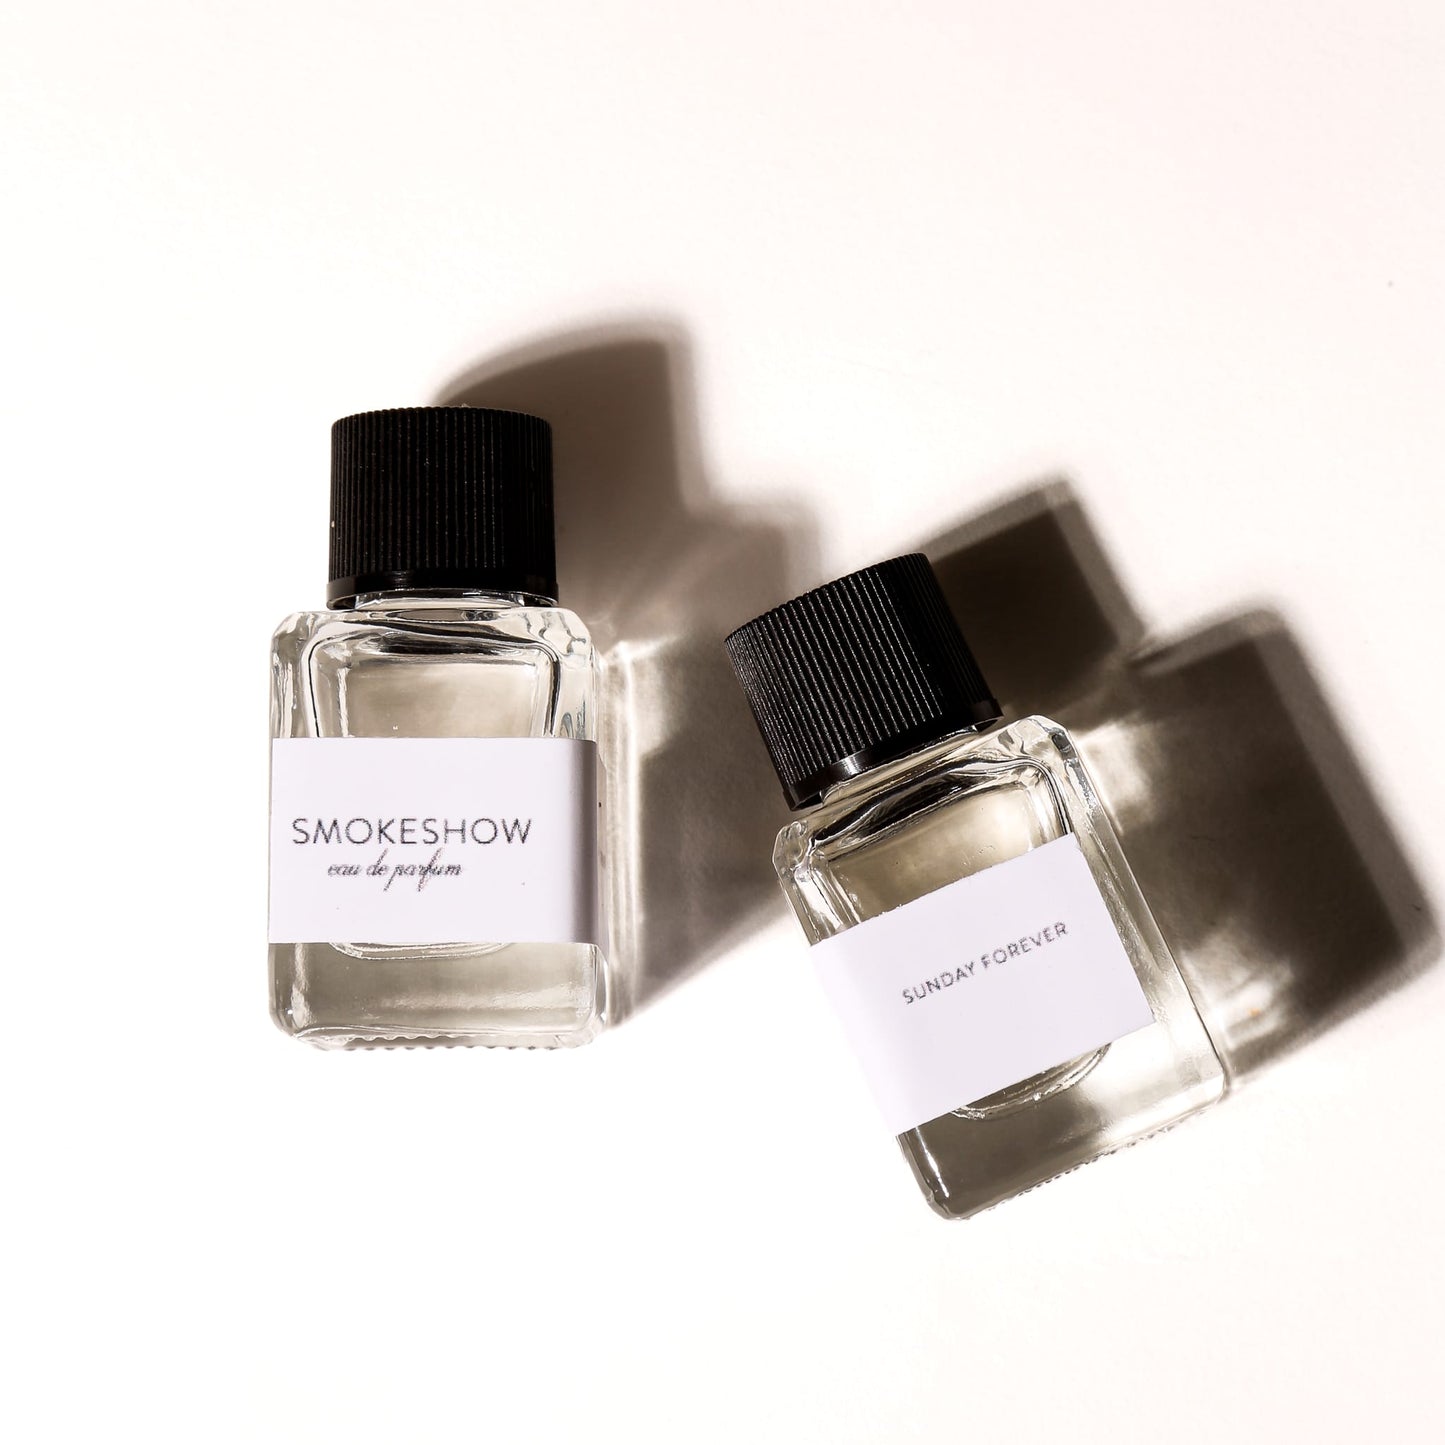 The Sunday Forever Scent Discovery Set